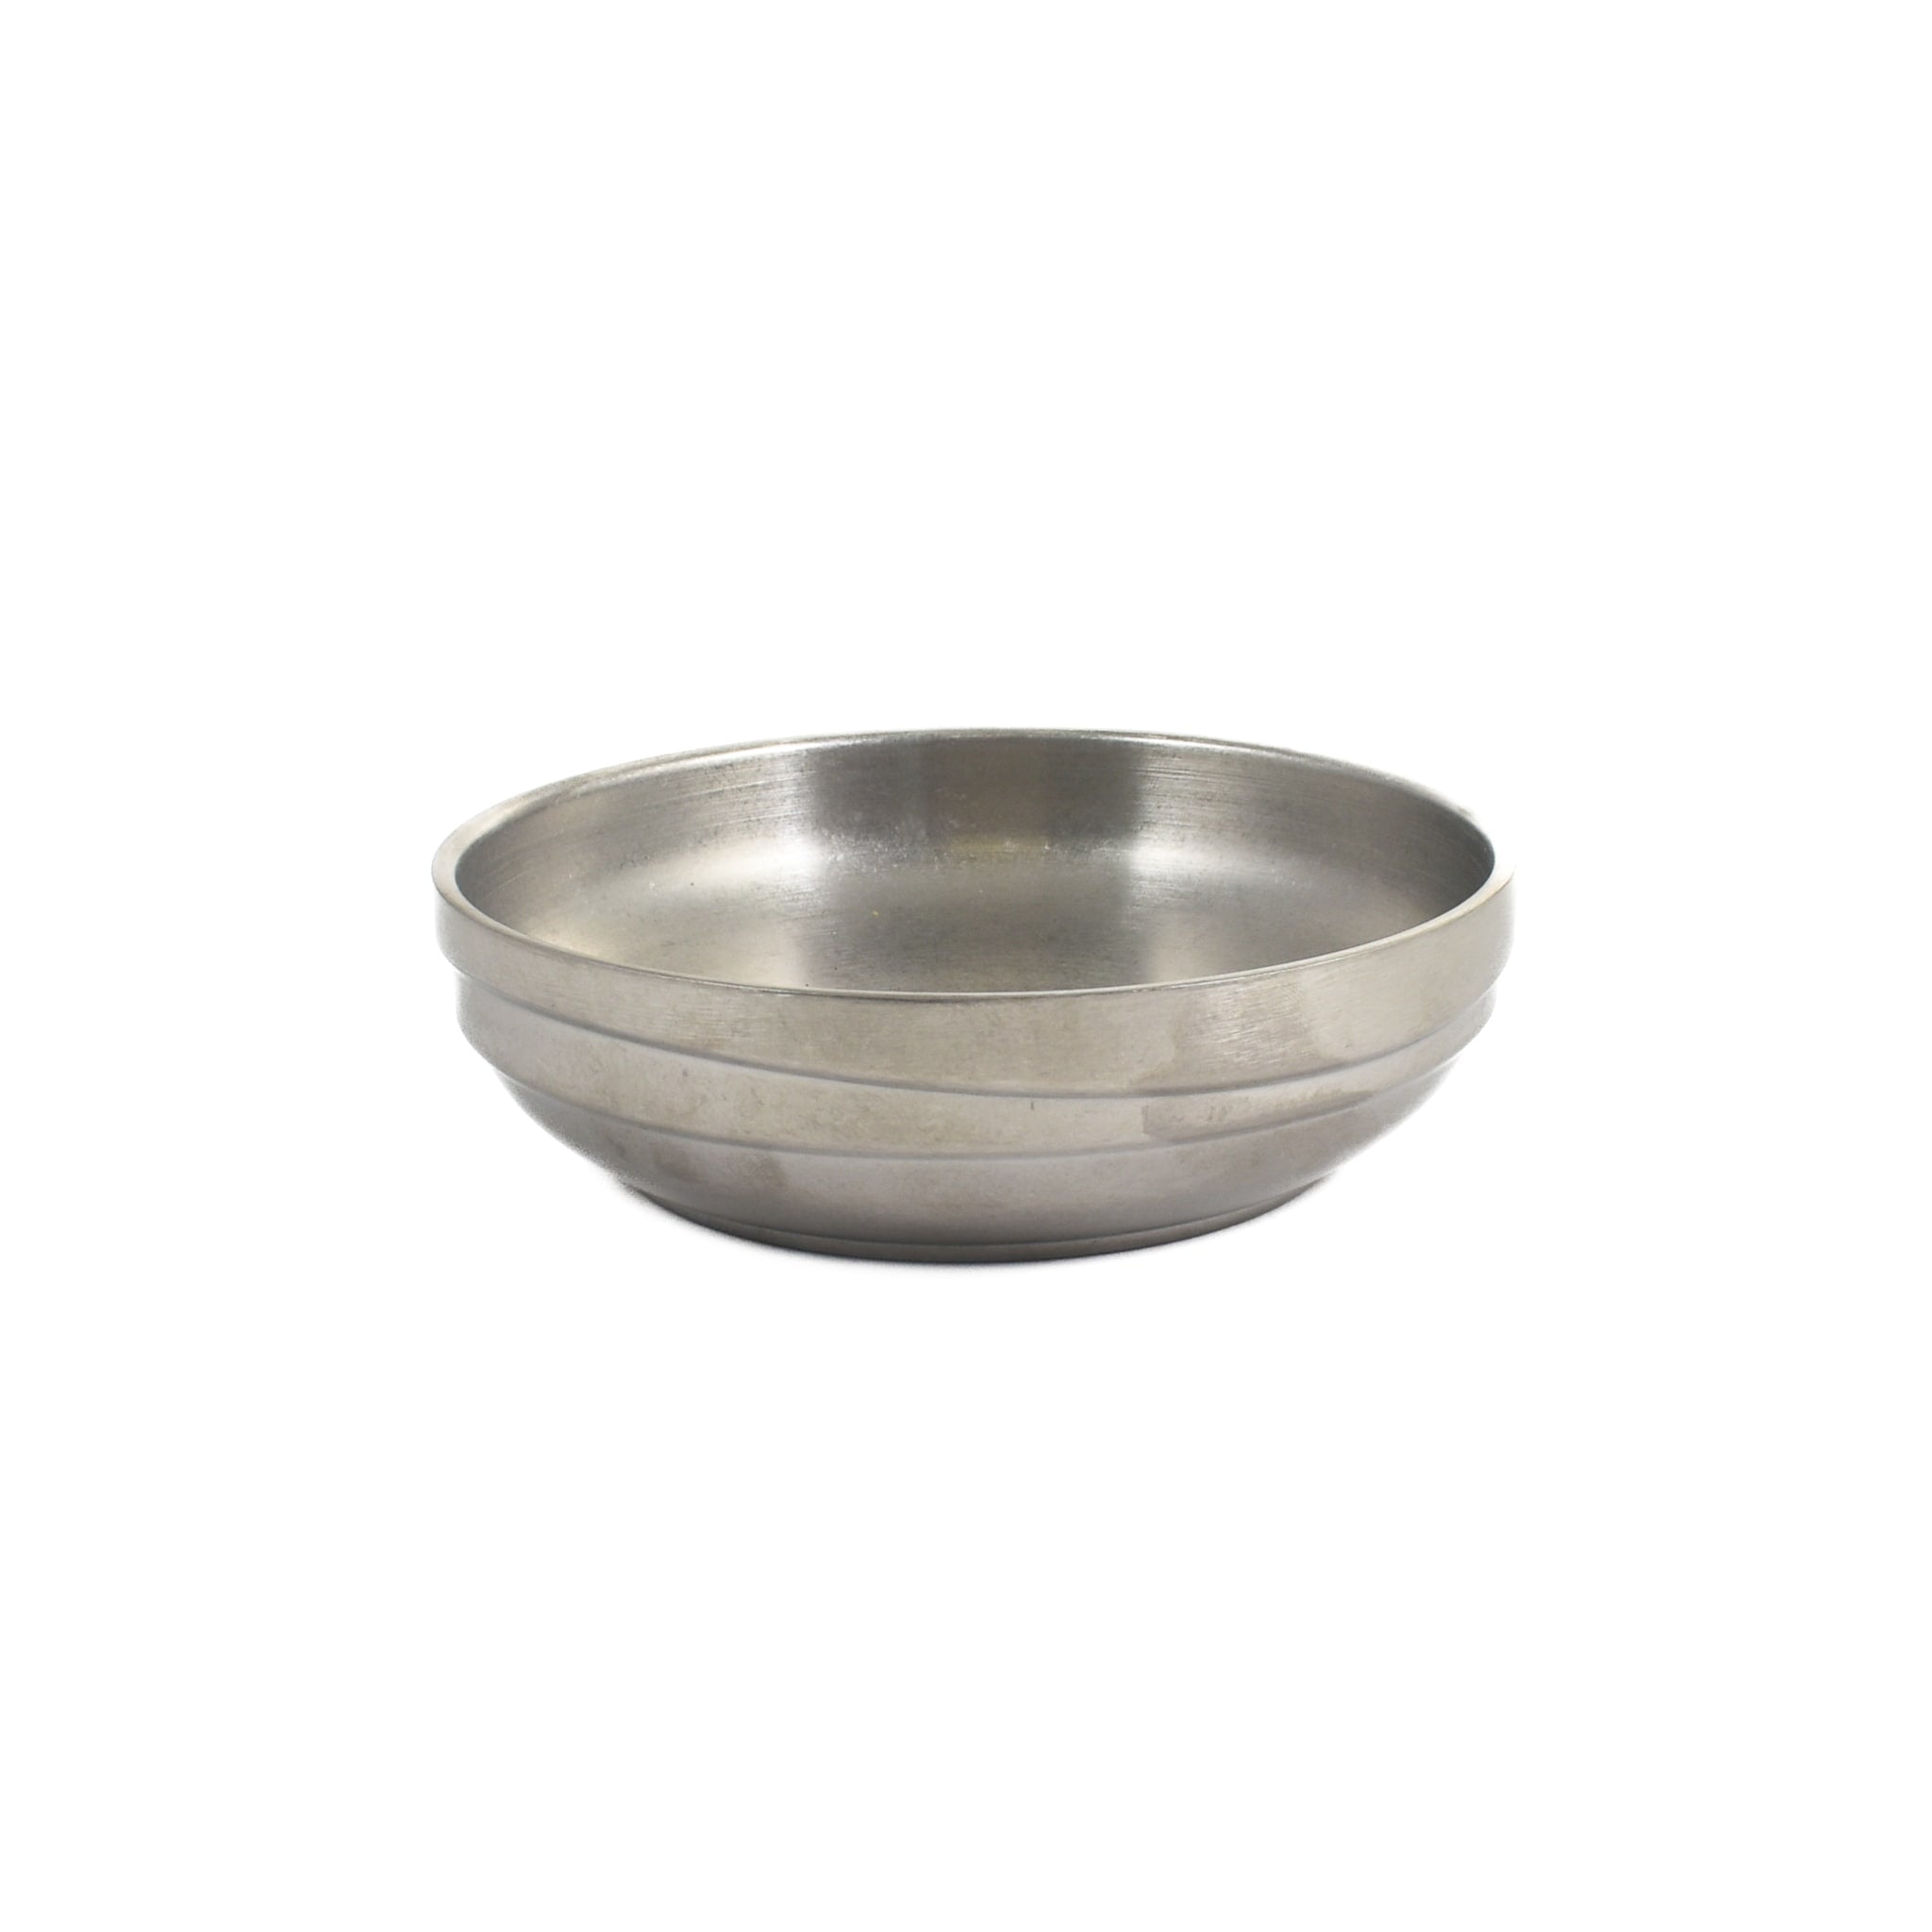 Vintage Style Stainless Steel Bowl, 15cm